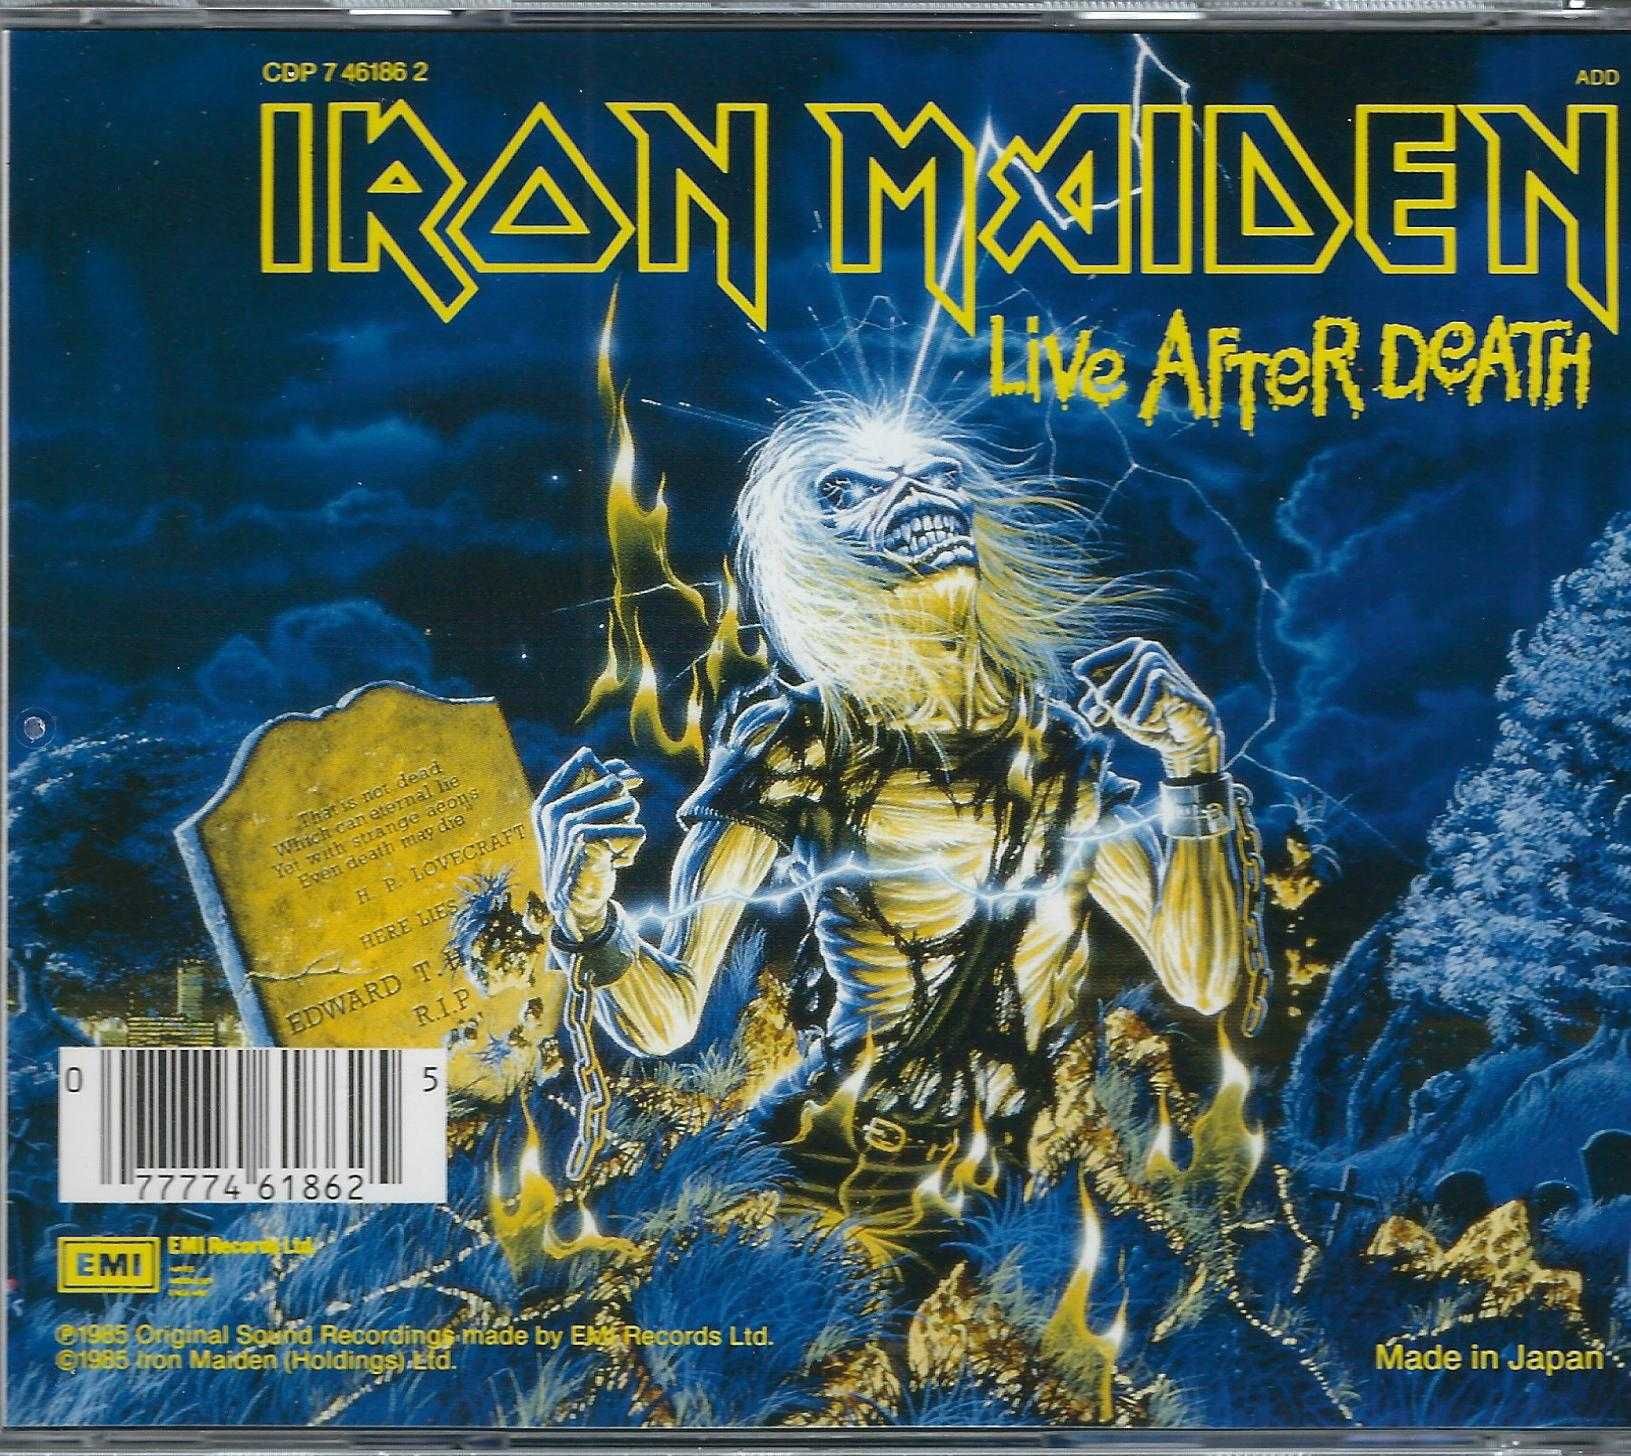 CD Iron Maiden - Live After Death (1985) (EMI)